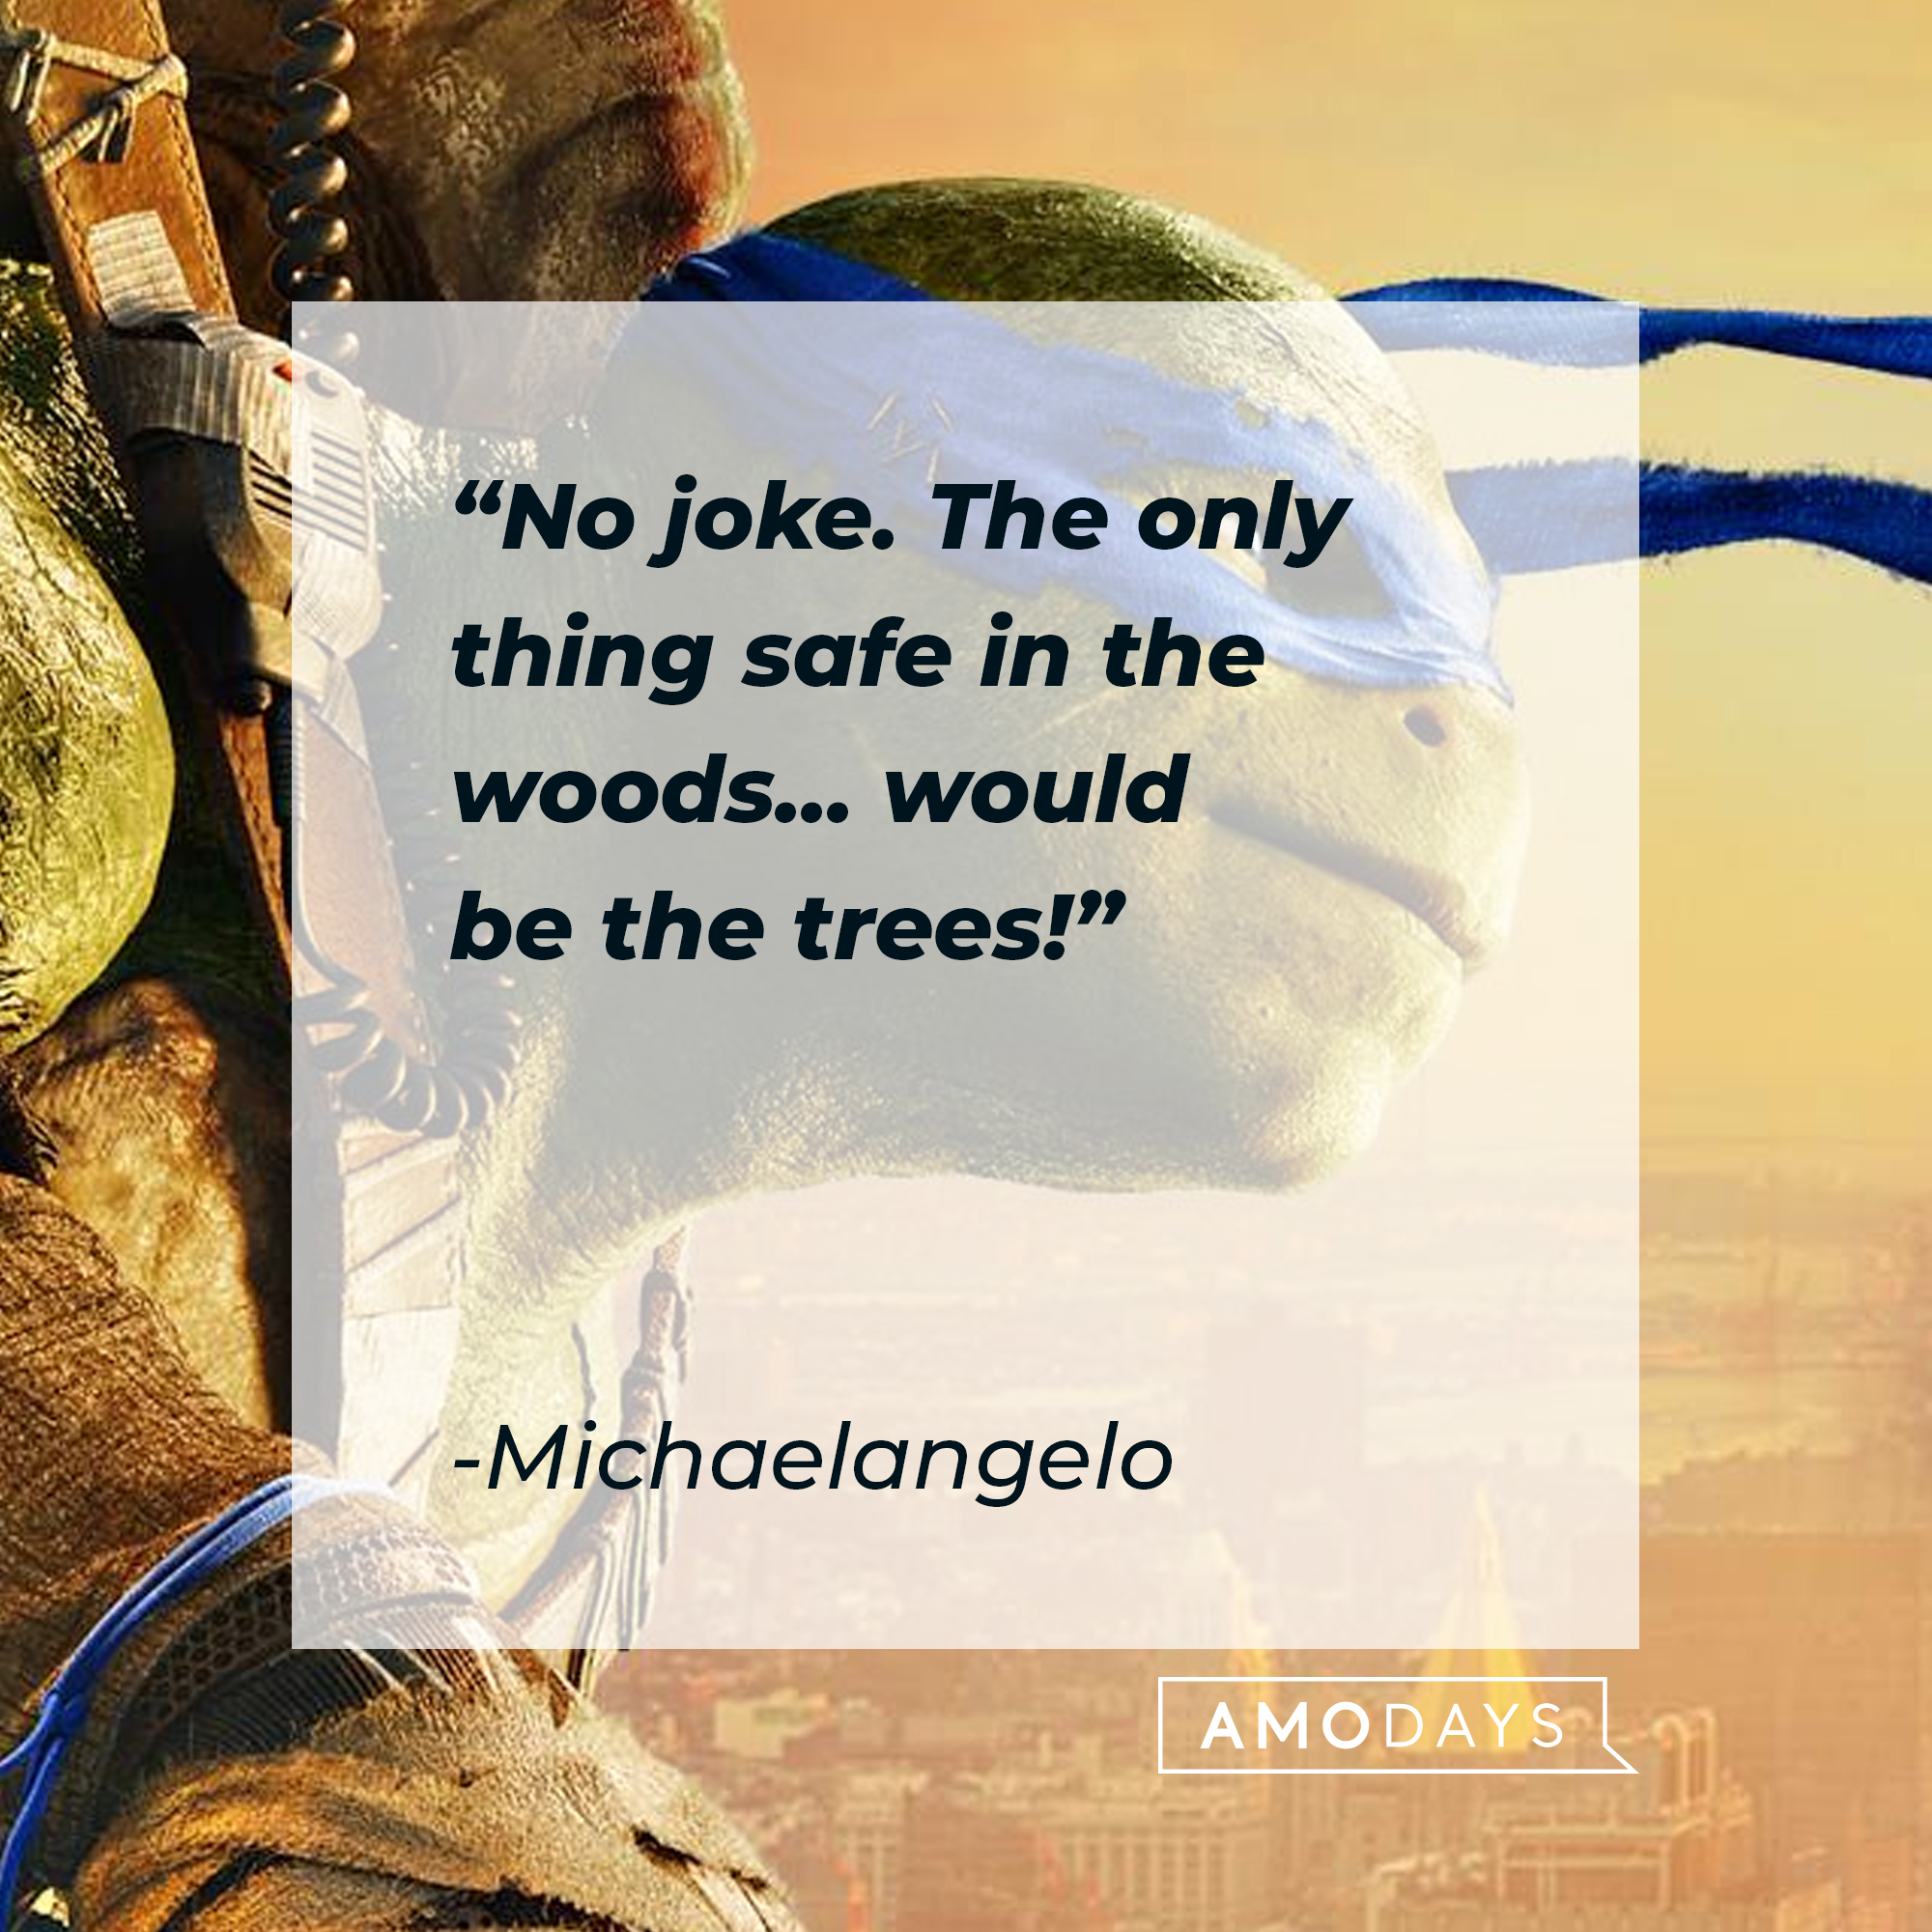 Michaelangelo's quote: "No joke. The only thing safe in the woods... would be the trees!" | Source: facebook.com/TMNT